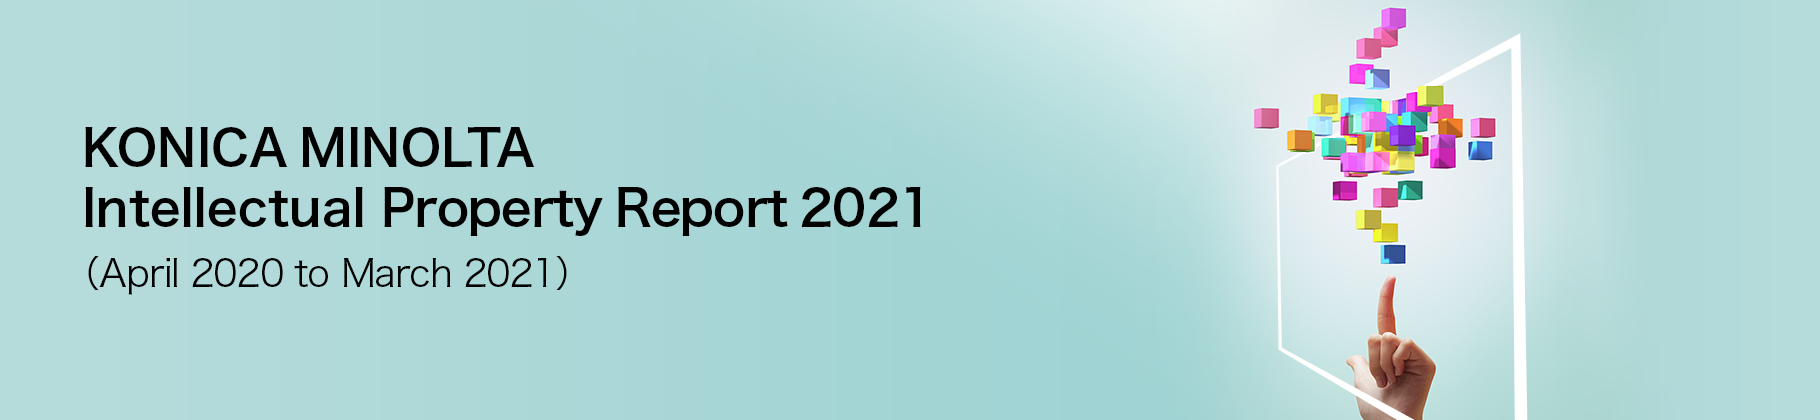 Intellectual Property Report 2020(April 2020 to March 2021)